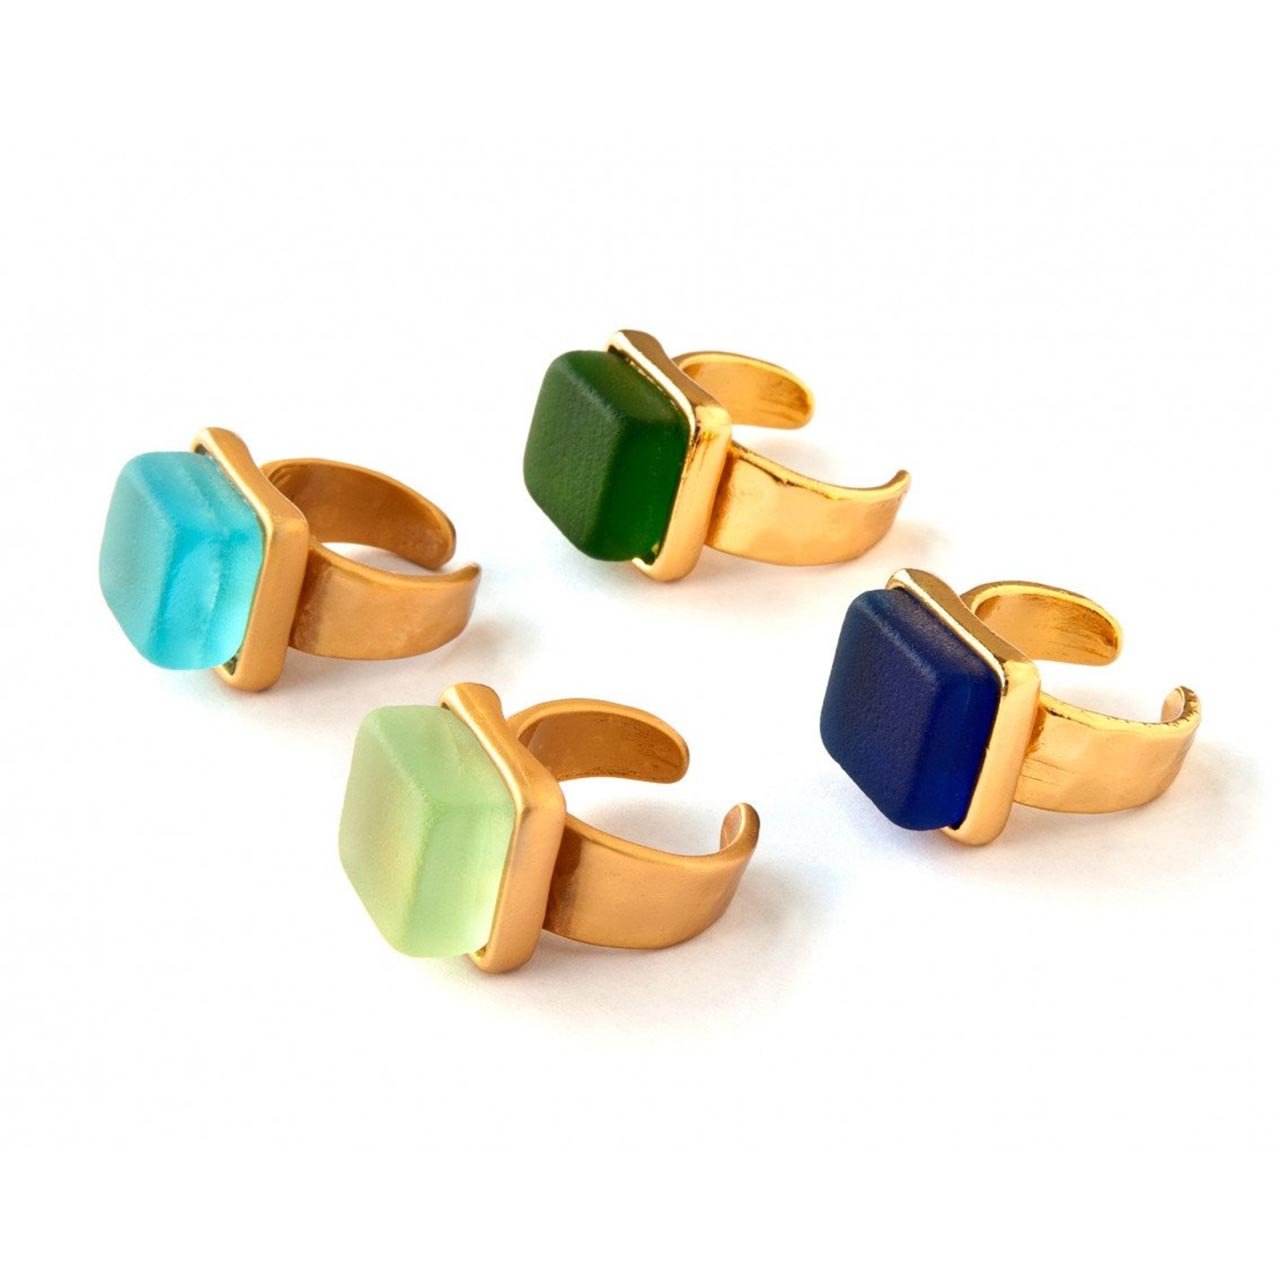 Gold band cocktail rings with square green stone, light blue stone, light green stone and dark blue stone